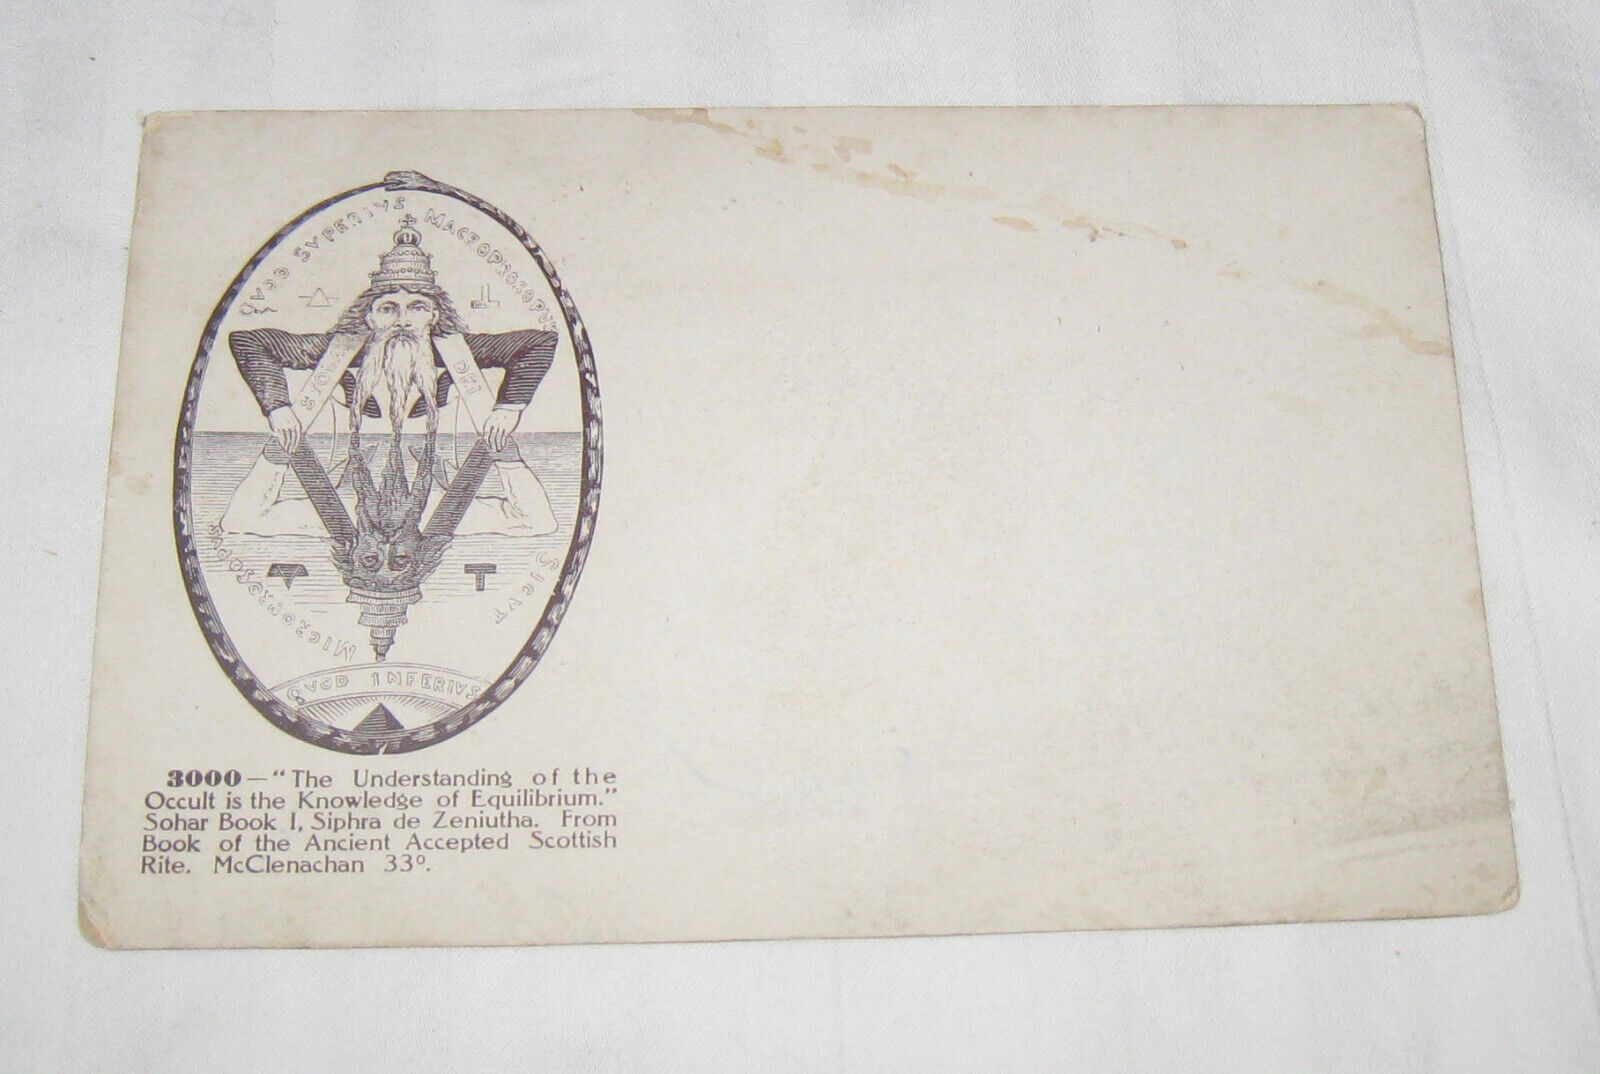 RARE VINTAGE 1901-07 OCCULT POSTCARD IMAGE OF MAGUS from “SOHAR BOOK I, SIPHRA d